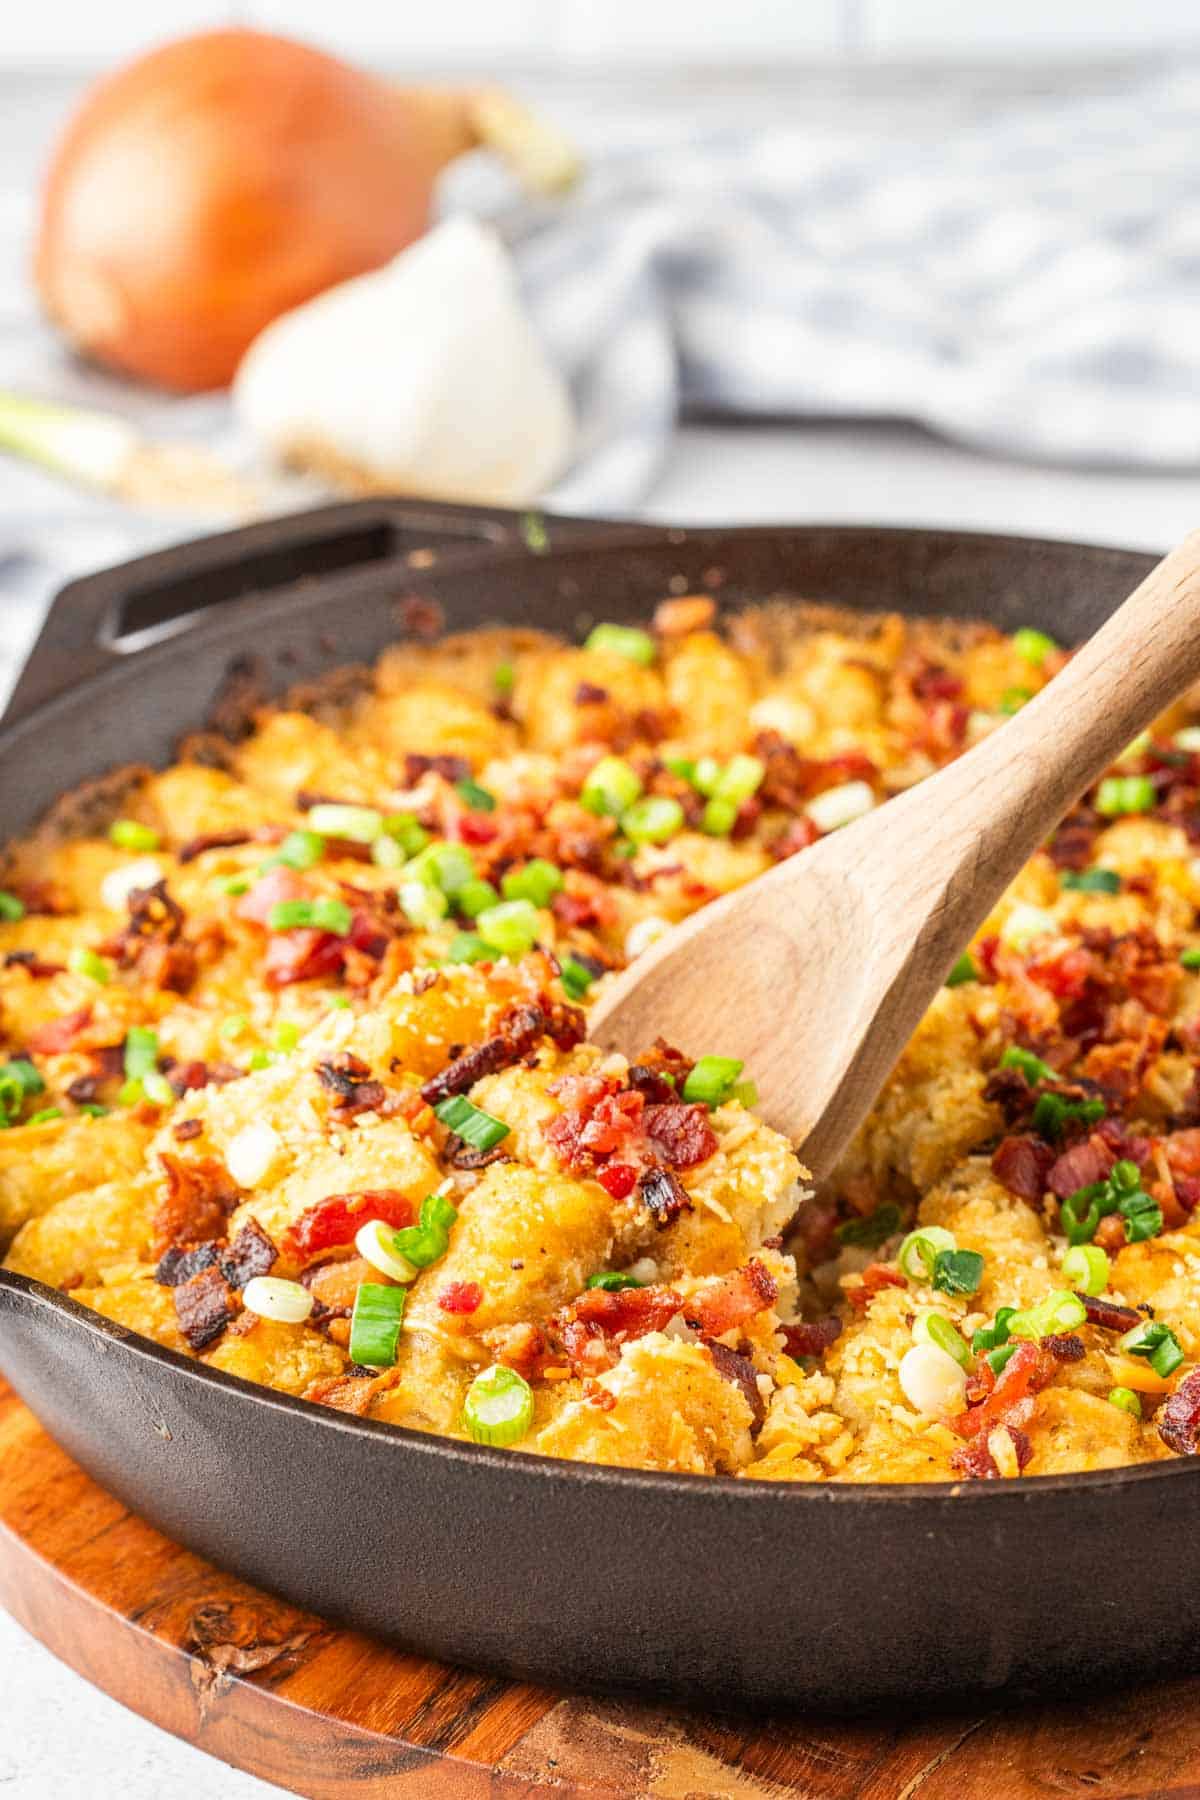 A cast-iron skillet filled with cowboy casserole topped with tater tots.